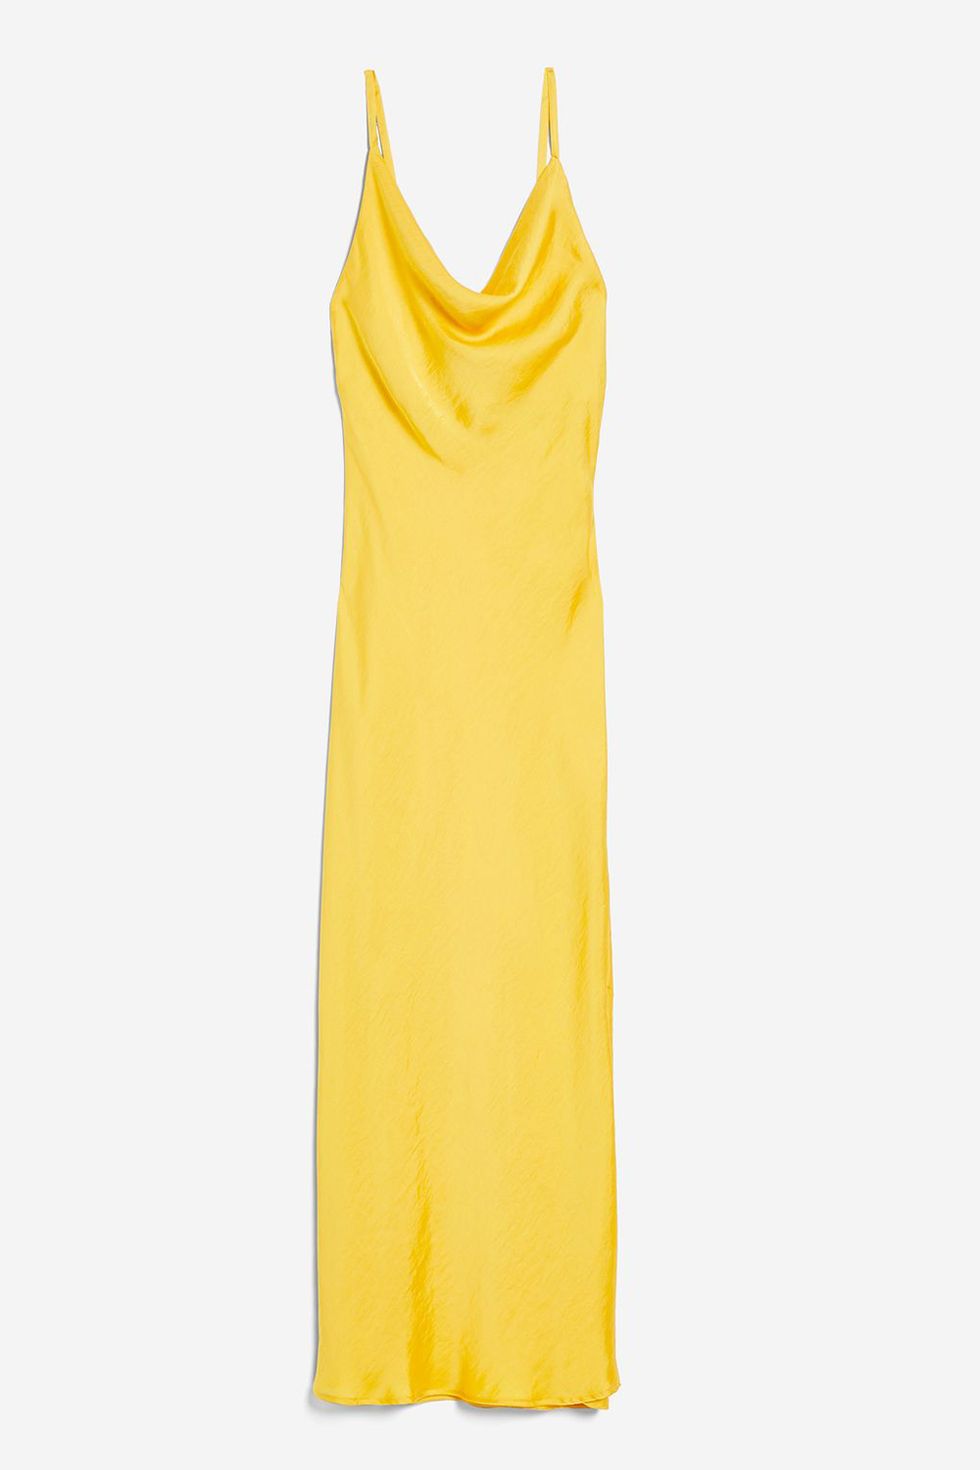 Clothing, Day dress, Yellow, Dress, Active tank, Cocktail dress, Sleeveless shirt, One-piece garment, Neck, Cover-up, 